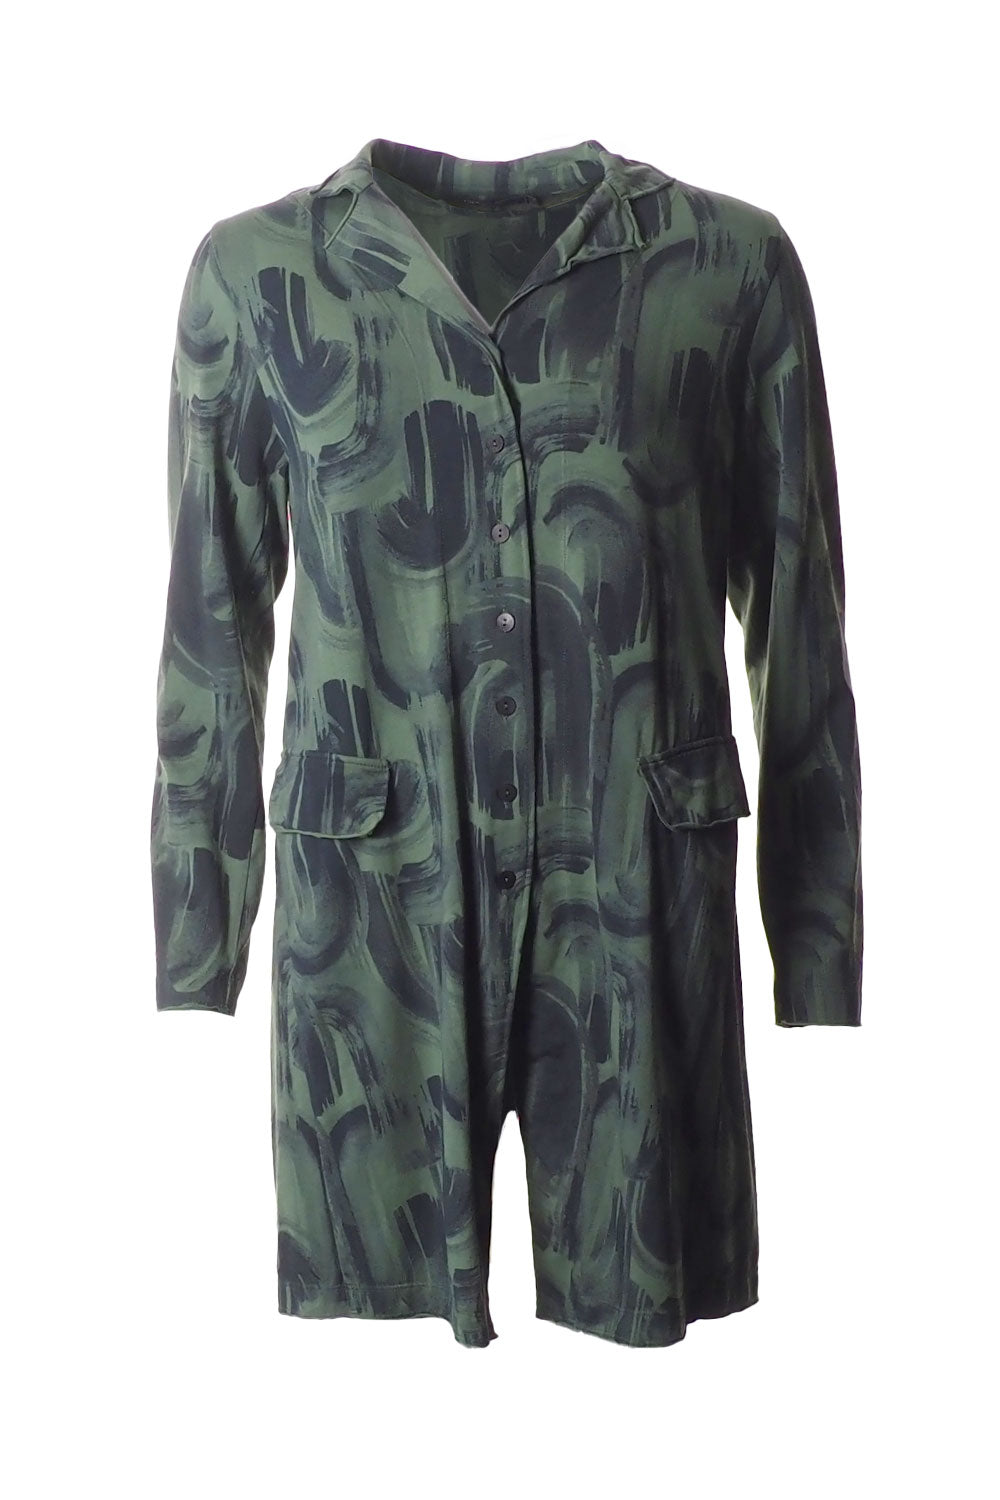 Grizas Abstract Swirl Cotton 71262 Long Jacket Green